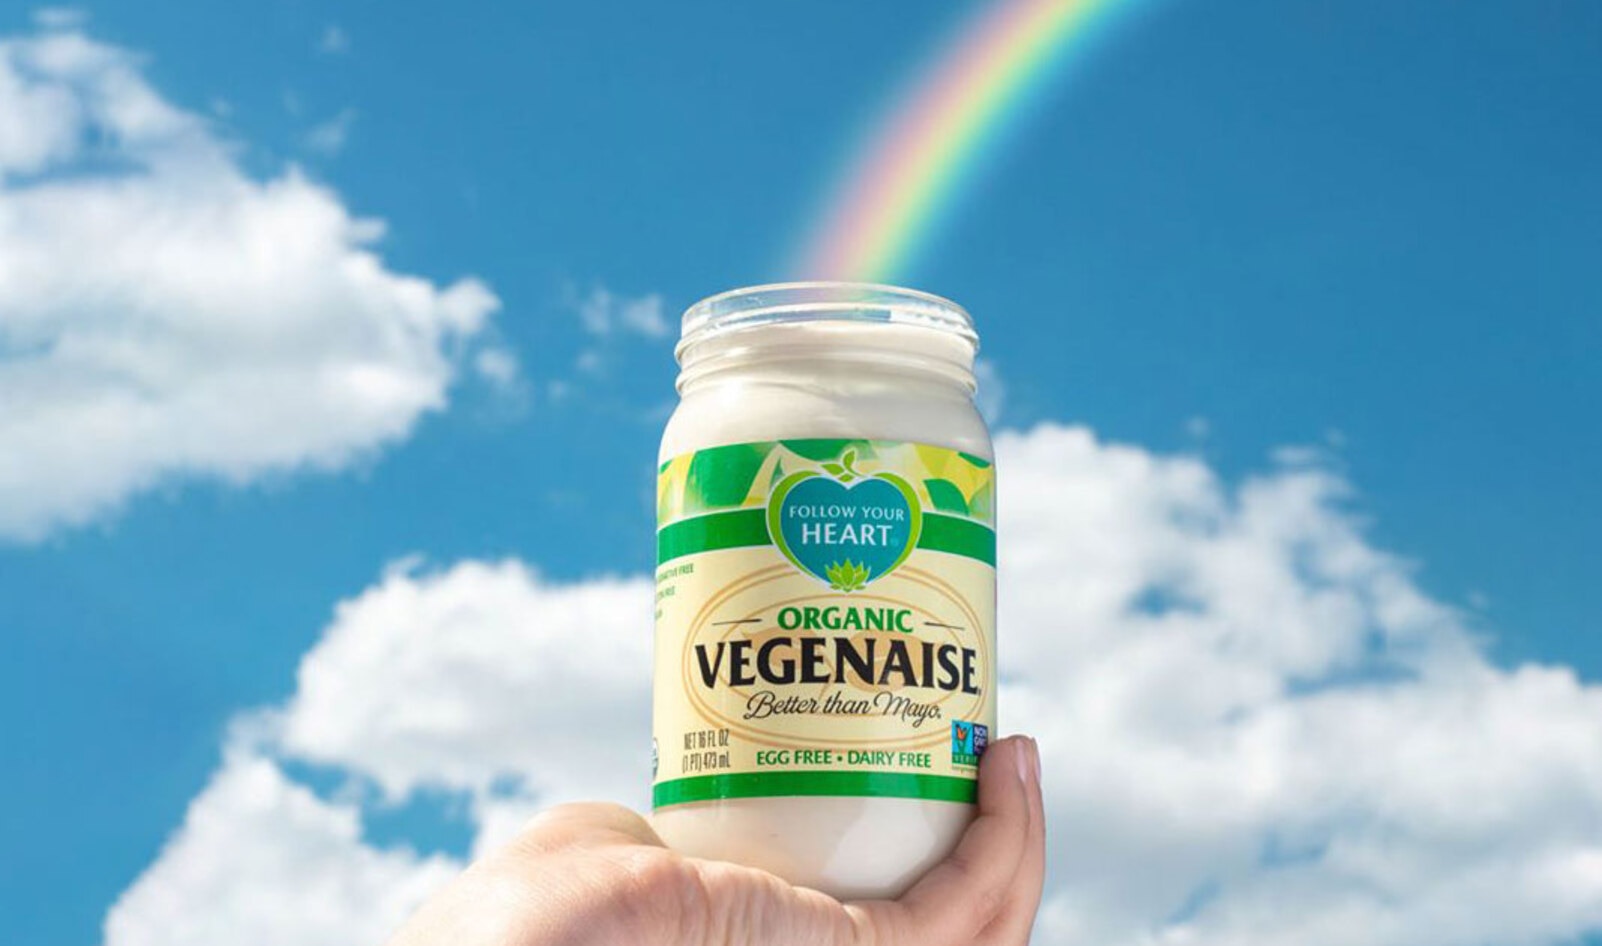 Vegan Brand Follow Your Heart Is Now Recycling Its Snack Wrappers Into Park Benches